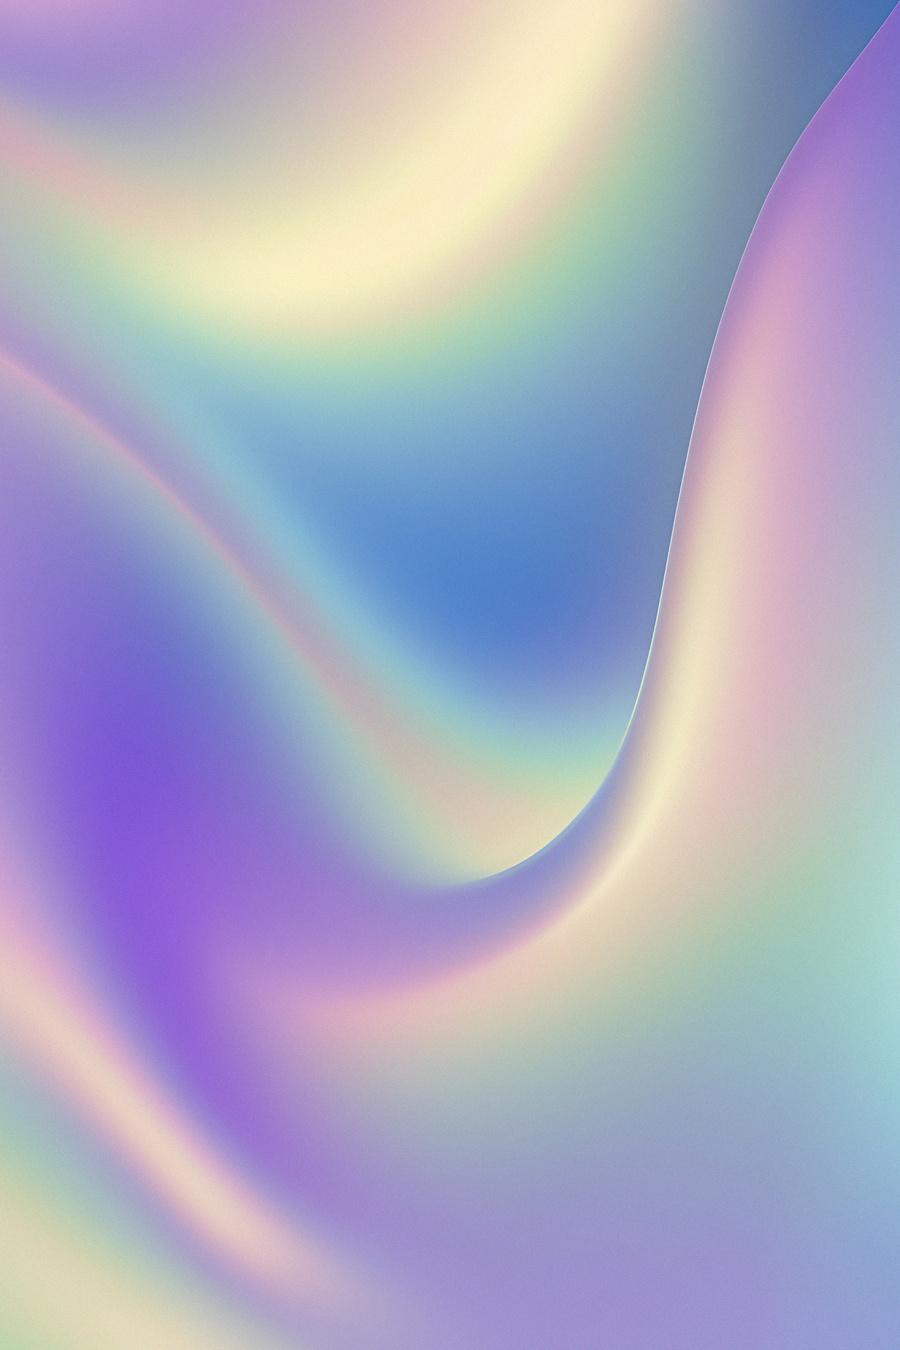 Holographic Abstract Background